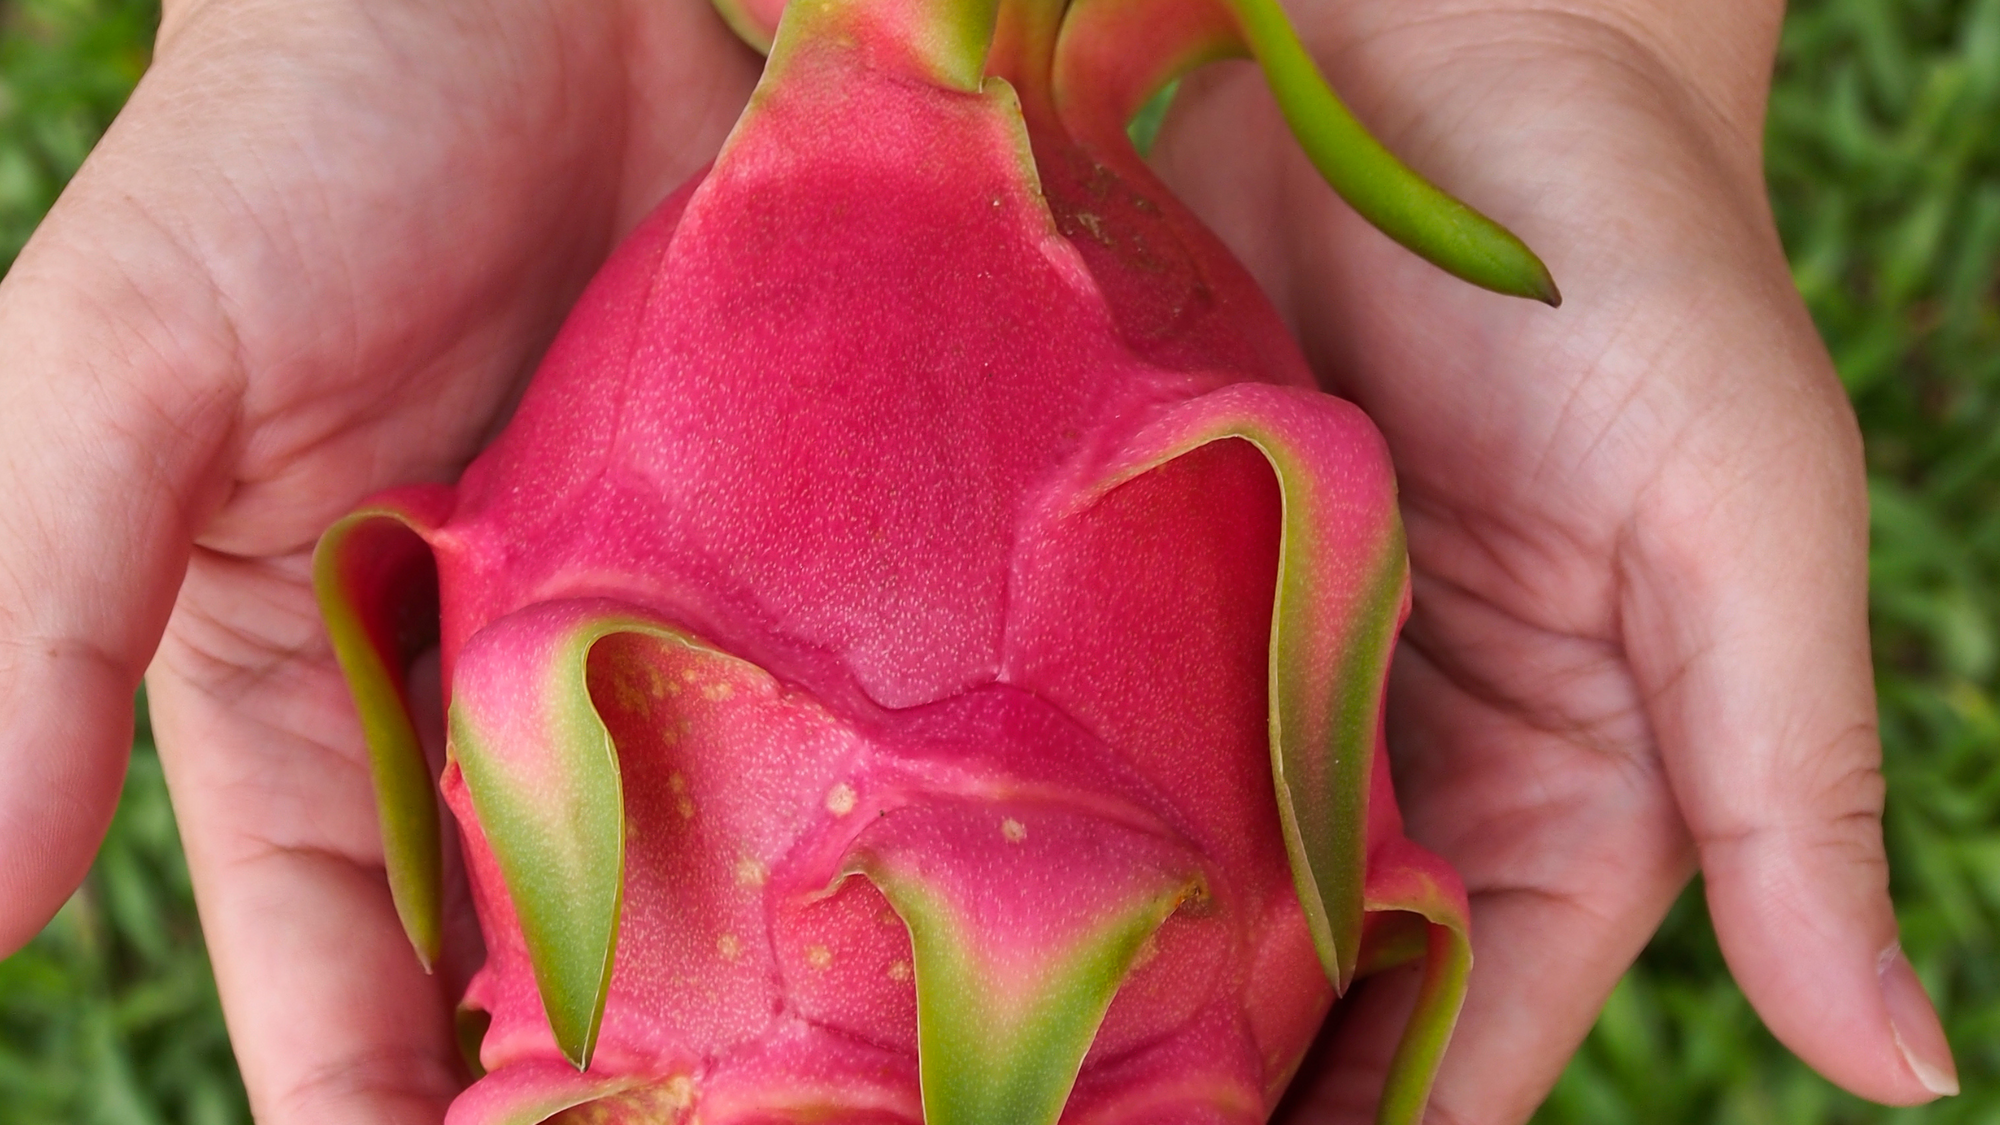 Opinion Piece by Mike Prociv on Dragon Fruit Growing.